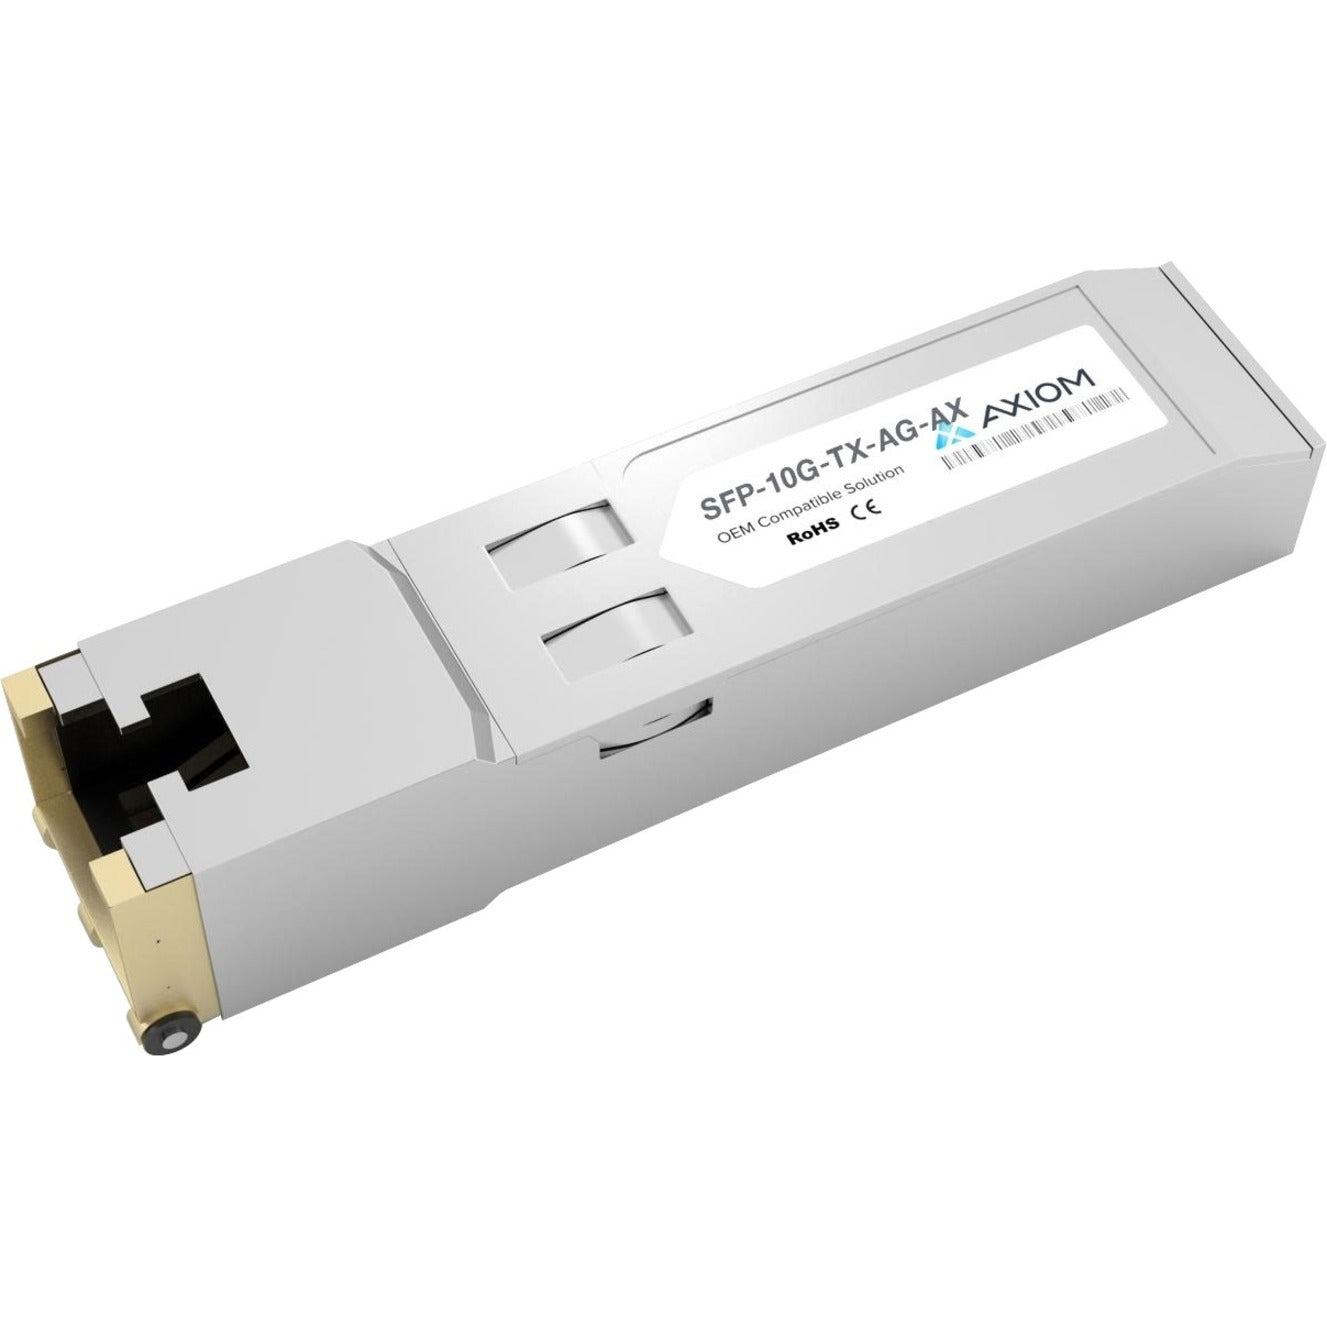 Axiom SFP-10G-TX-AG-AX 10GBASE-T SFP+ Transceiver for Avago - High-Speed Network Connectivity